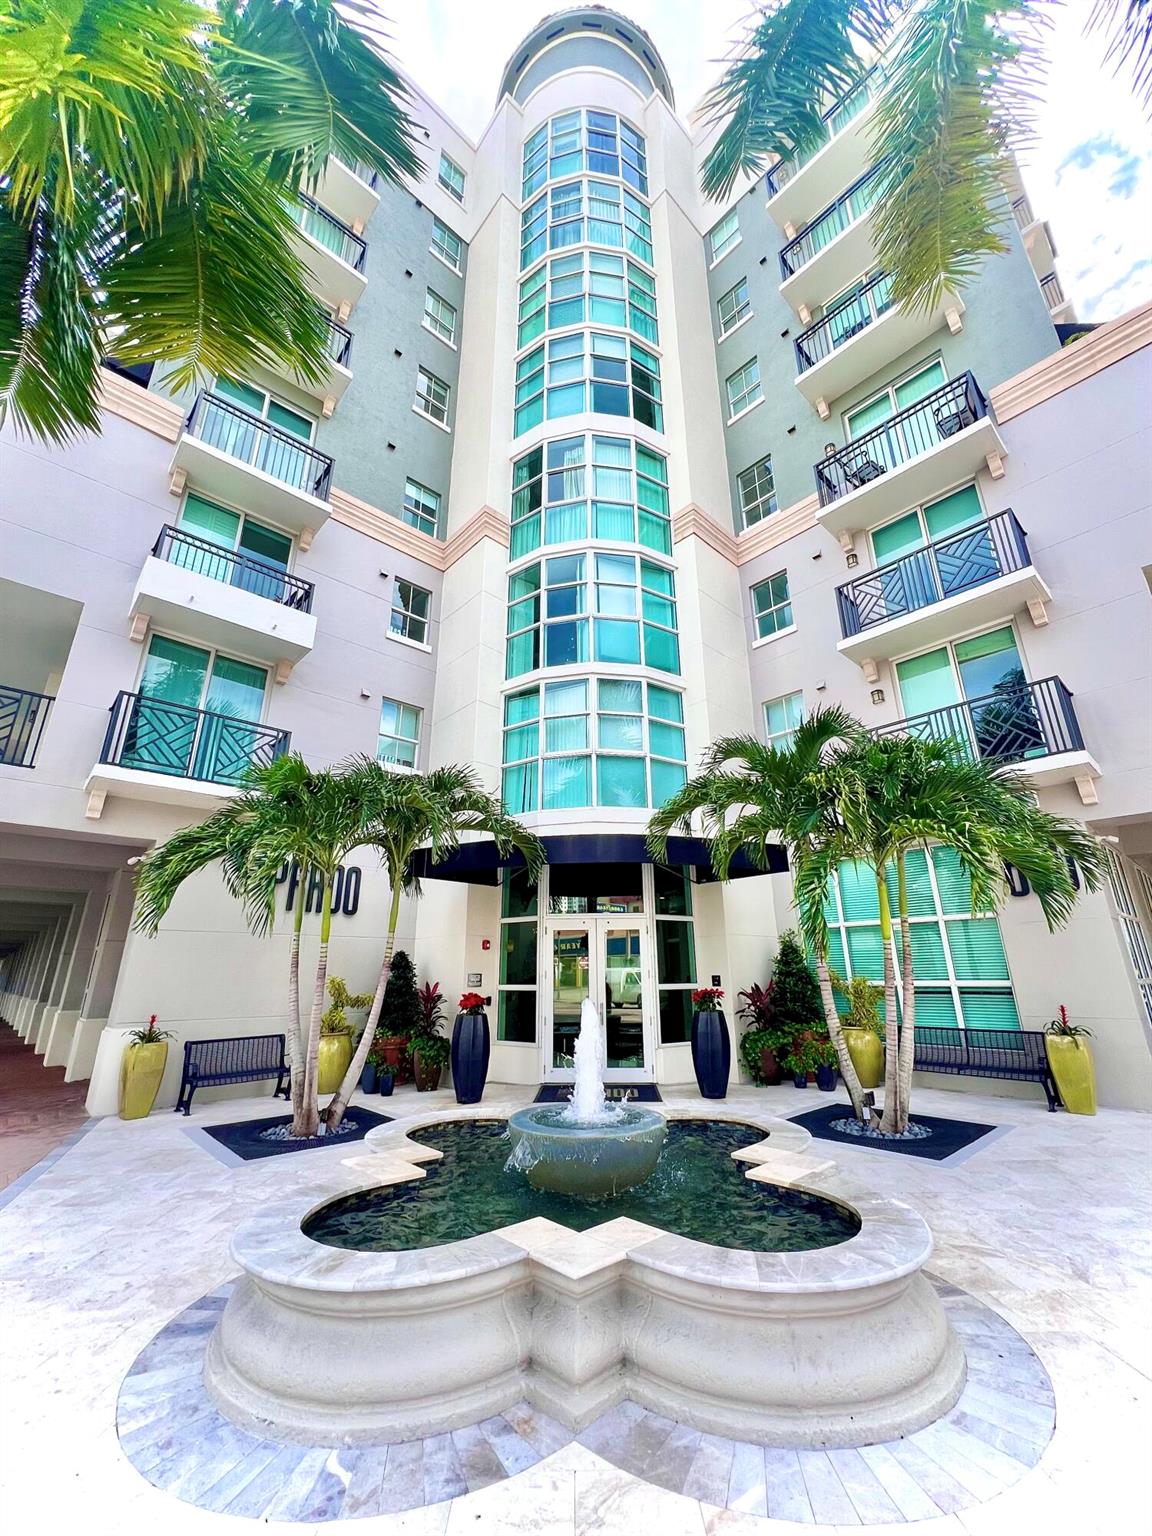 *SELLER IS GIVING $10,000 SELLERS CONCESSION/CREDIT TO BUYER AT CLOSING* Be in the heart of downtown West Palm Beach in this move-in ready renovated 2 bedroom 2 bath condo comes FULLY FURNISHED/TURNKEY or UNFURNISHED. This unit is located on the 5th floor steps away from The Prado pool, jacuzzi-tub, steam room, courtyard, new fitness center, and new club house. Unit comes with 1 assigned parking space in the garage located inside the building. Just 1 block from the intracoastal waterfront, 2 blocks to Rosemary Square and the Brightline Station, and a few short blocks to Historic Clematis St. Just a 10 minute drive to PBI airport. Quick access to Ft. Lauderdale and Miami. *Investors* There is no waiting period to rent out. The leases can be a minimum of 30 days